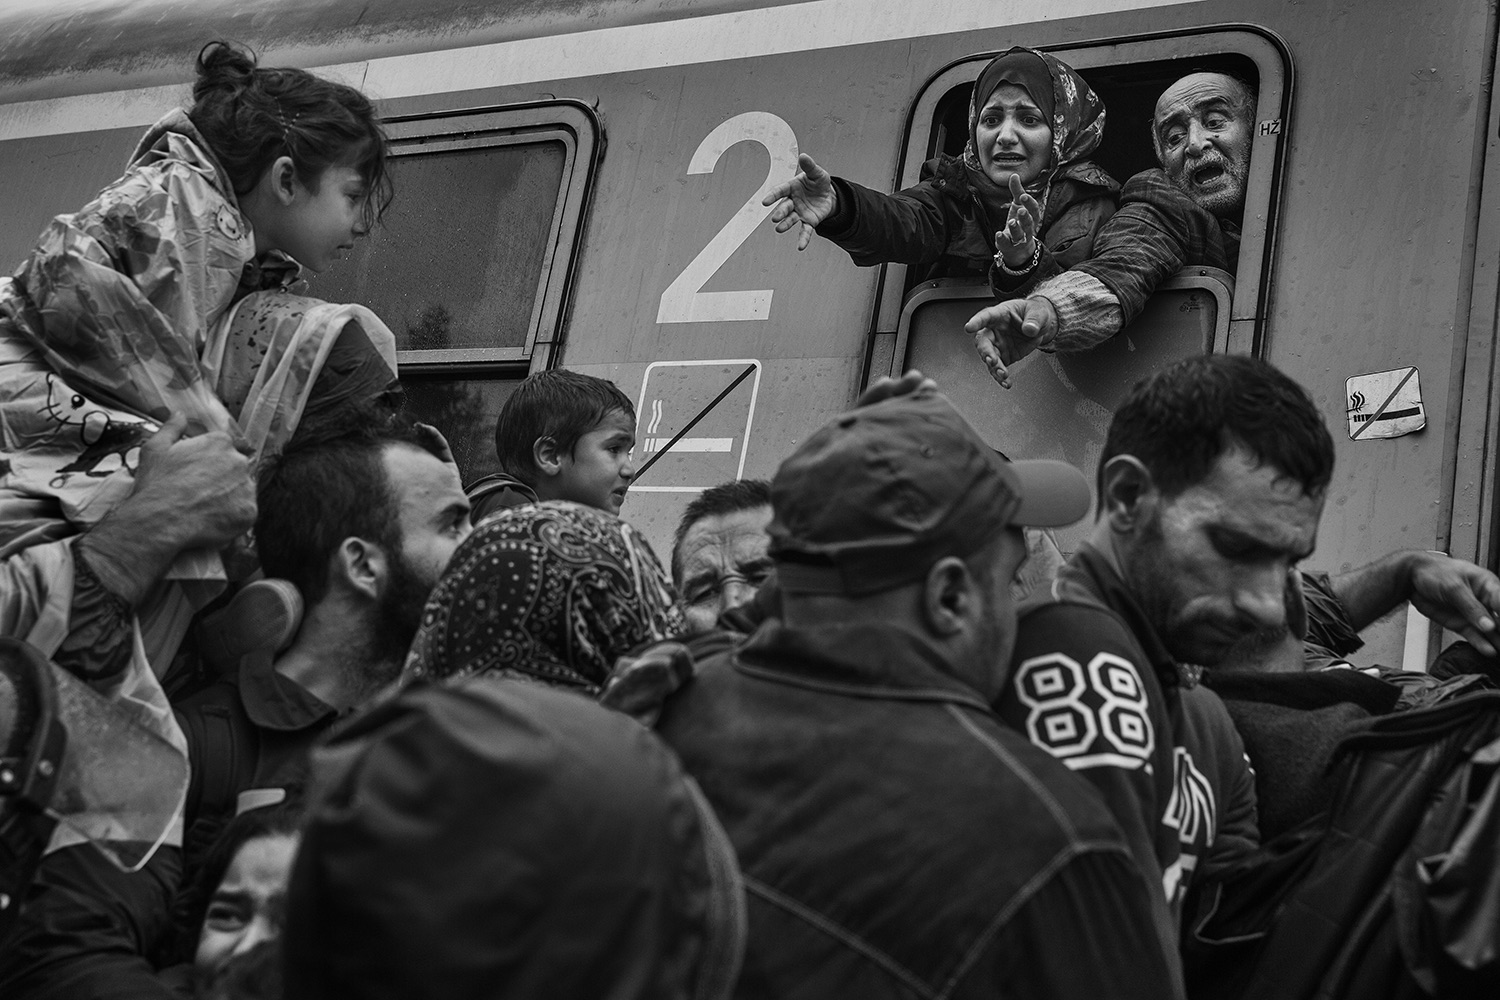 Refugees mainly from Syria, but also Afghanistan, Iraq and parts of Africa making their way across Europe. Walking from Serbia across border to Croatia, where they gathered at Tovarnik to board trains and buses to be transported to either Hungary or Slovenia, then to be taken to border with Austria and onward. by James Nachtwey